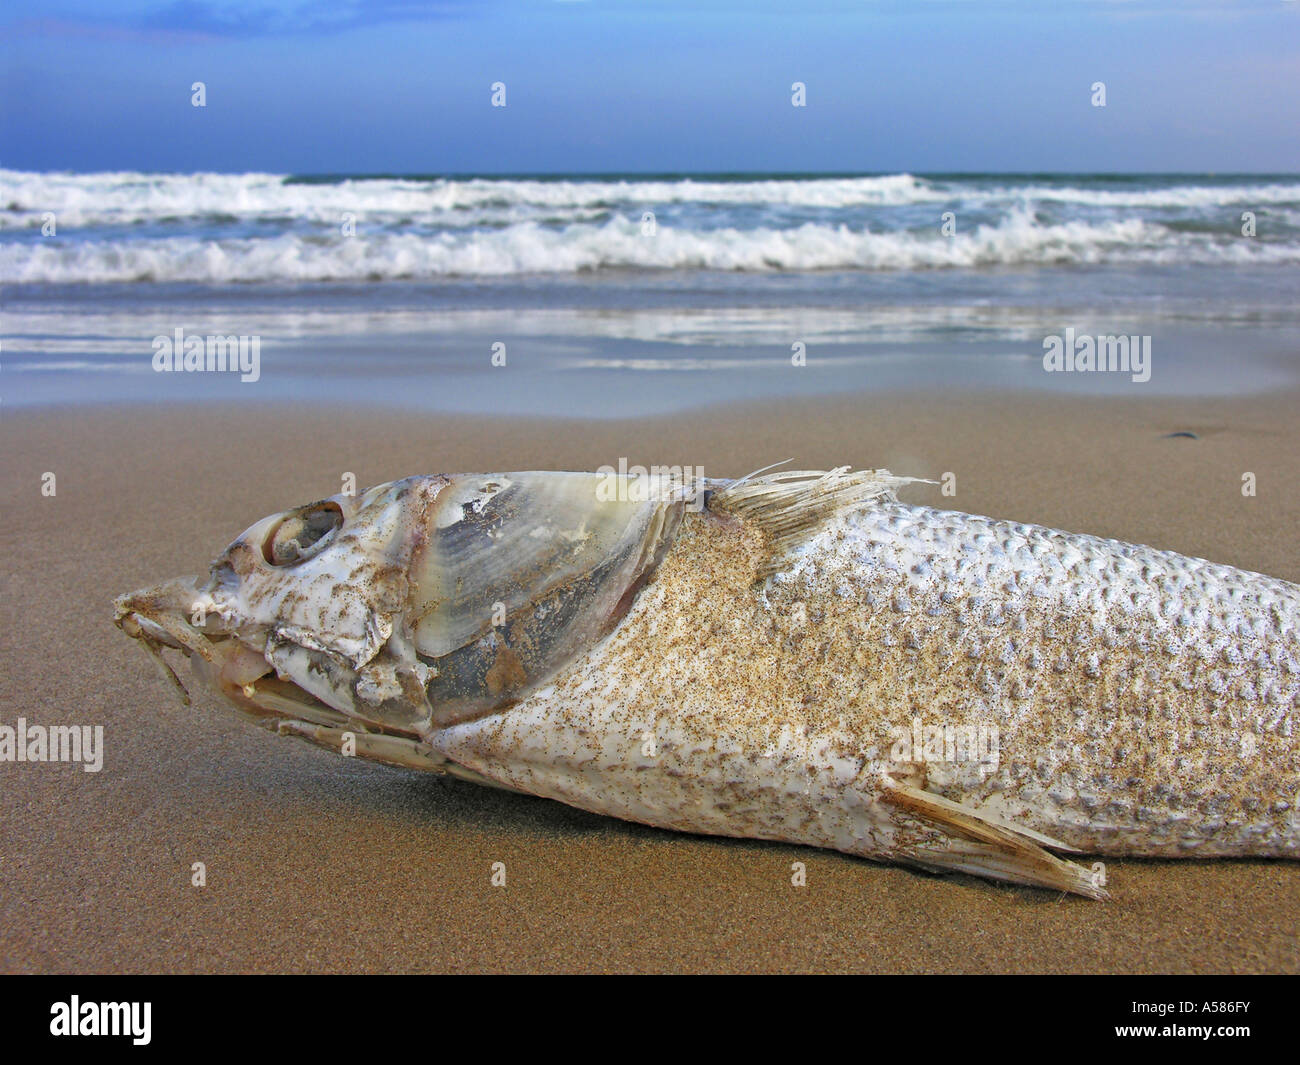 Dead stranded fish on the beach Stock Photo